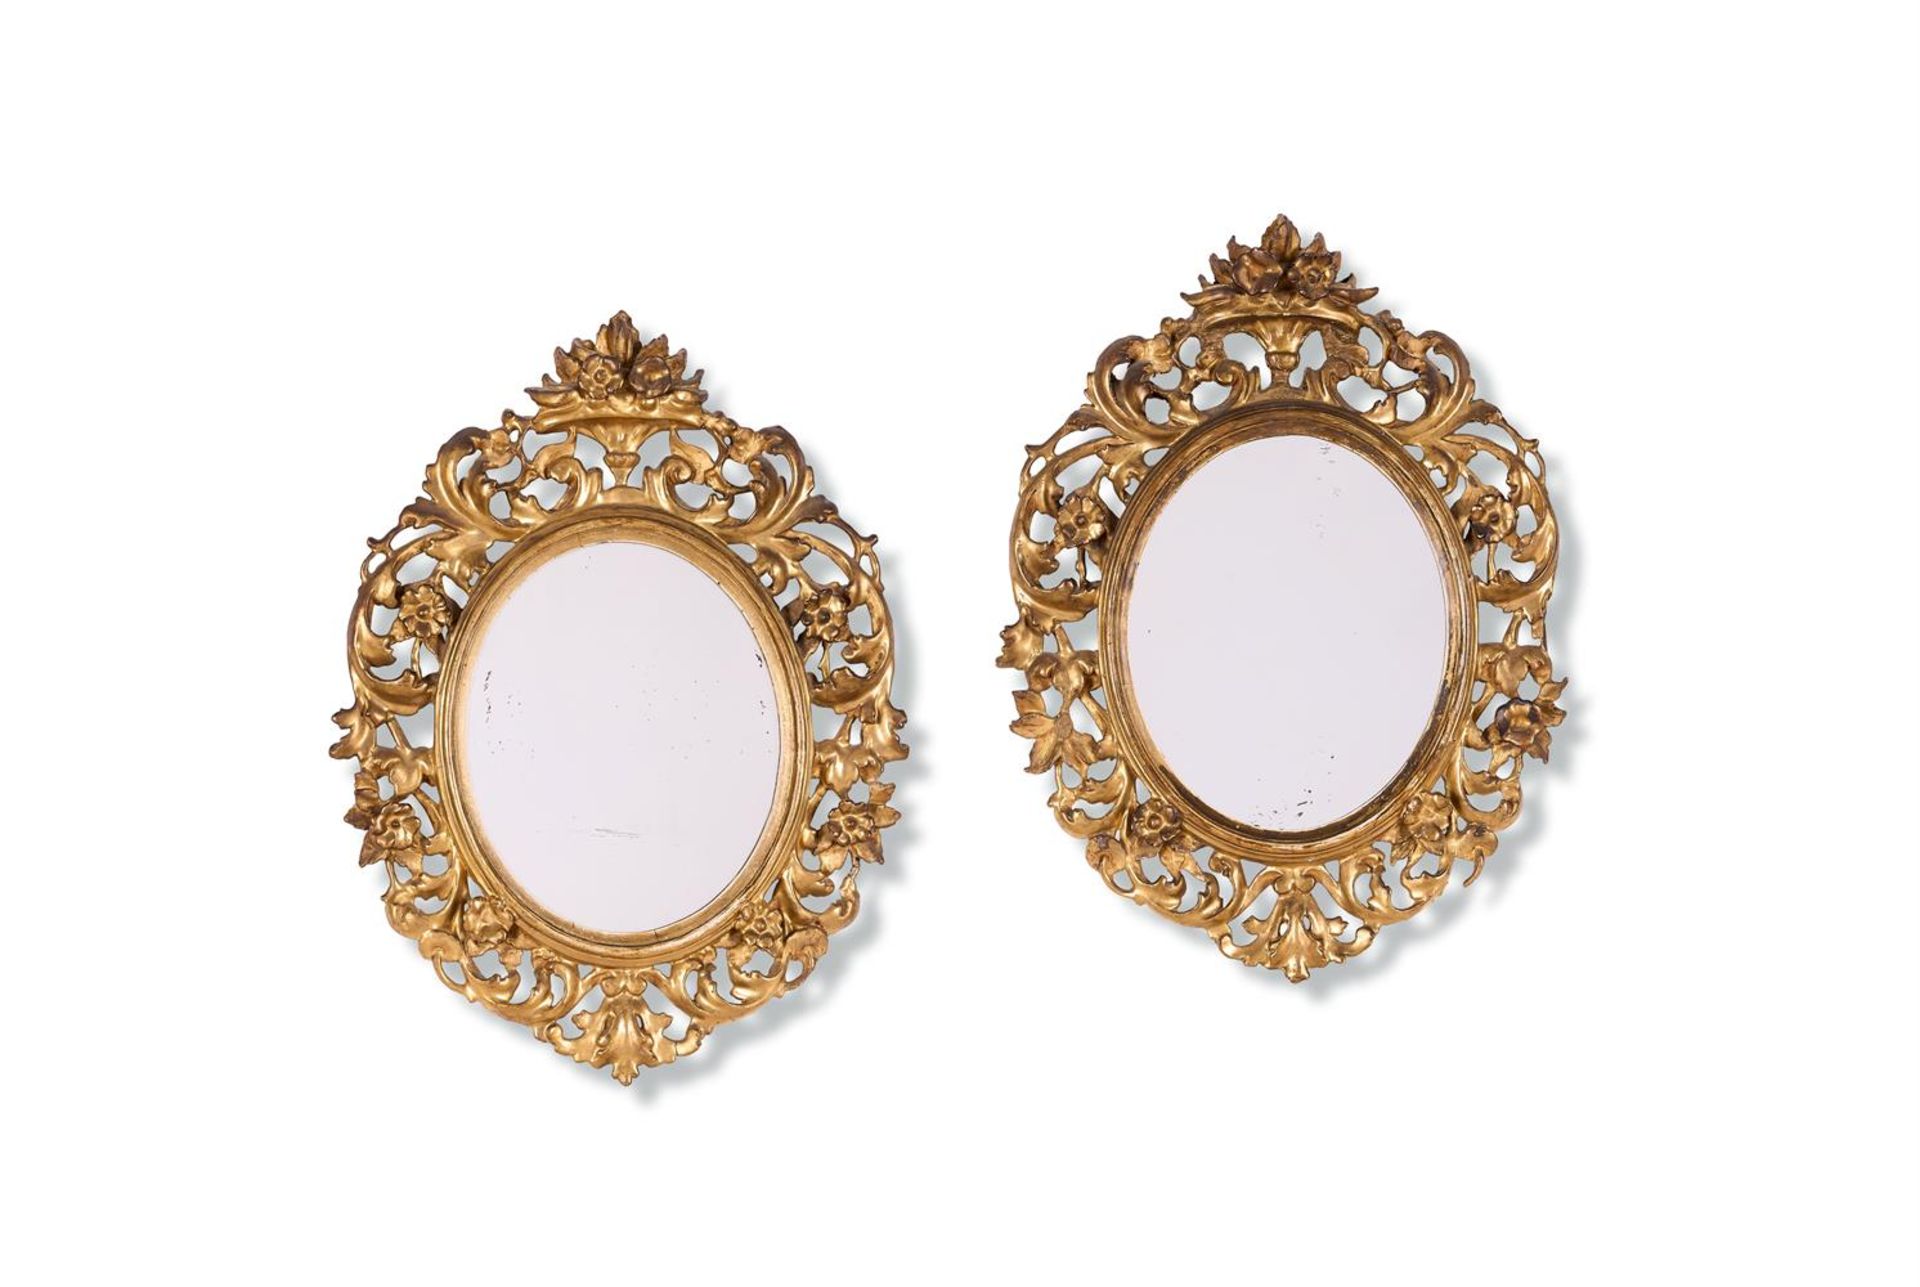 A PAIR OF EARLY VICTORIAN OVAL MIRRORS MID-19TH CENTURY